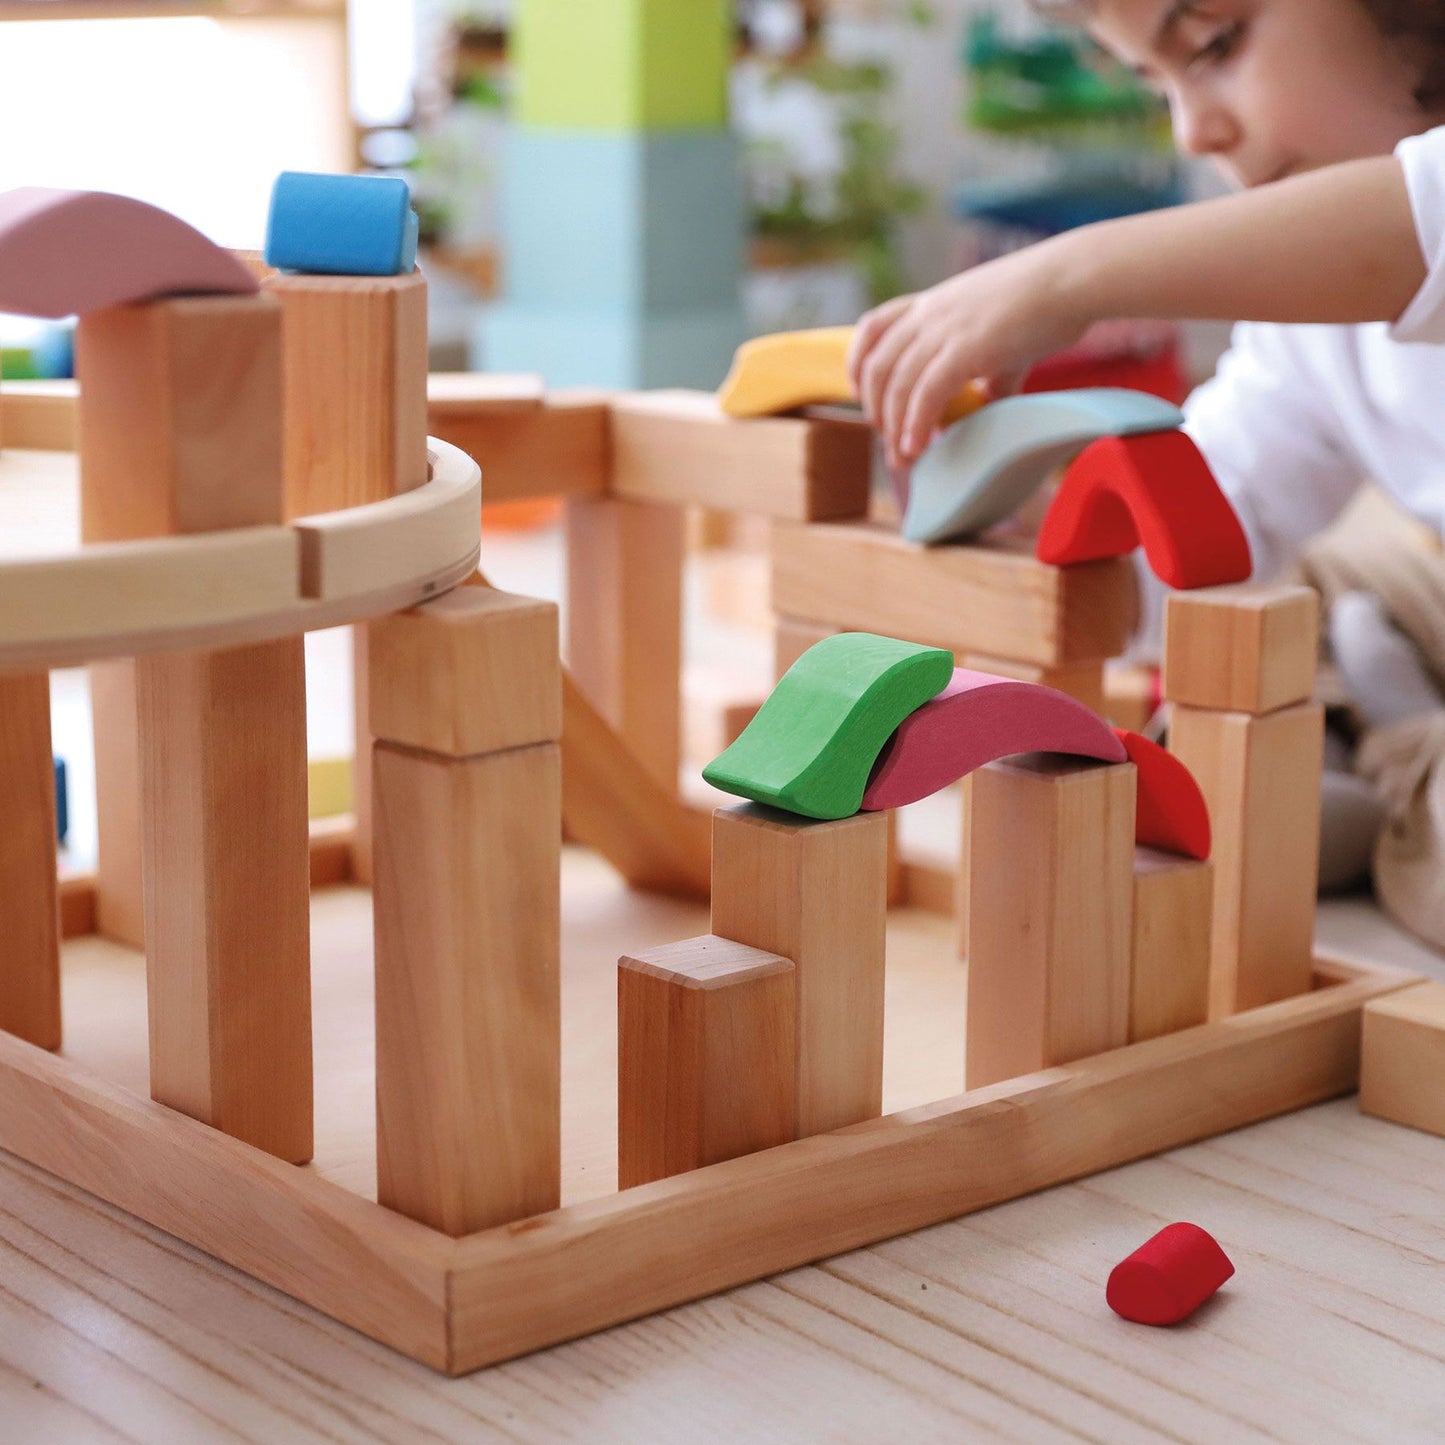 Large Natural Stepped Pyramid | Building Set | Wooden Toys for Kids | Open-Ended Play